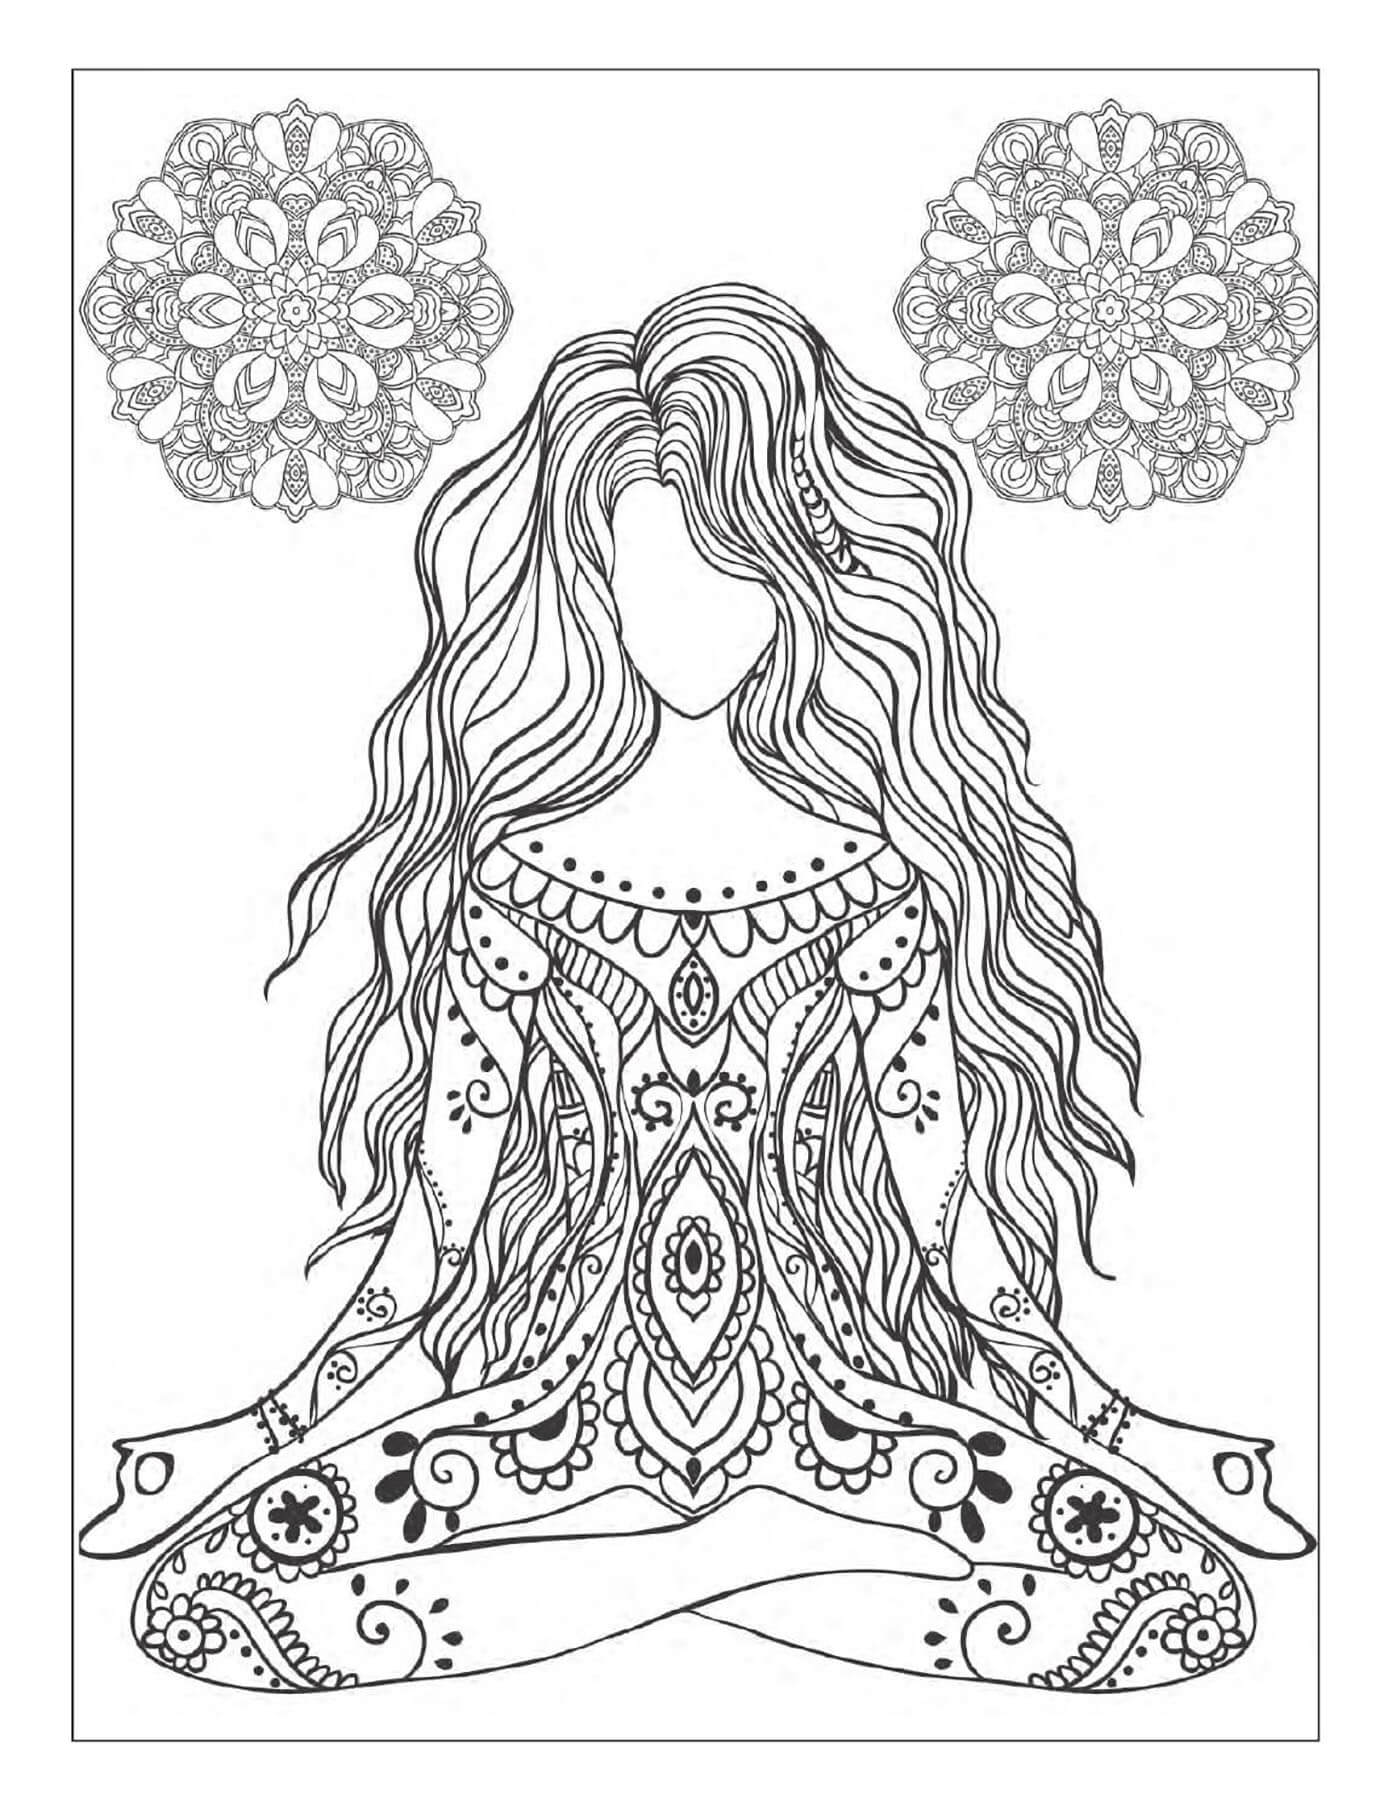 Cool Mediation Mindfulness Coloring Page